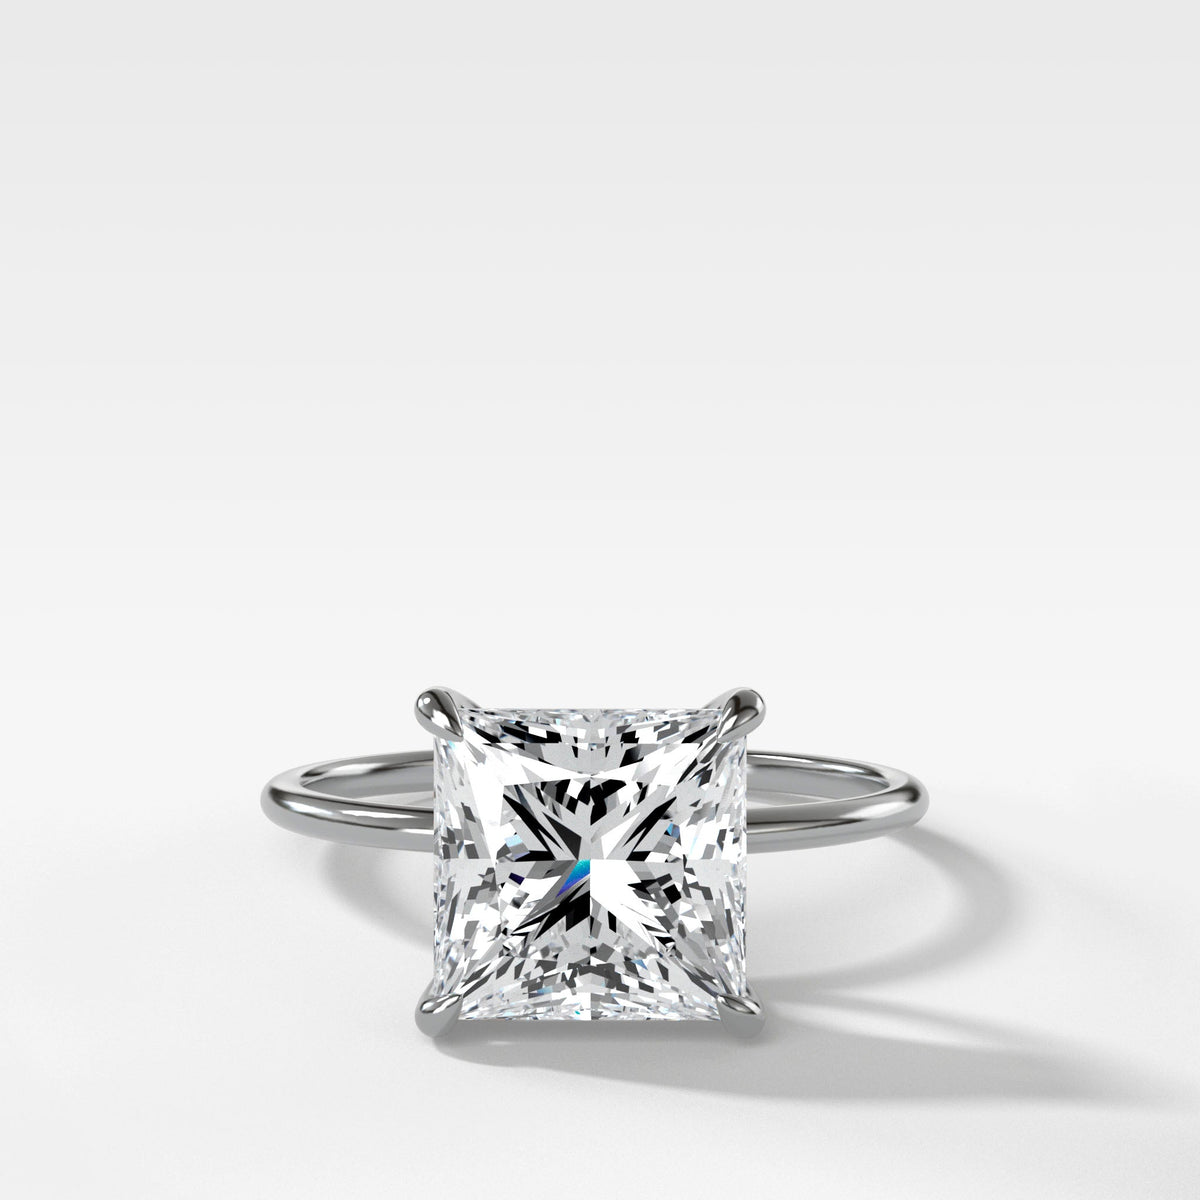 Thin + Simple Solitaire With Princess Cut by Good Stone in White Gold